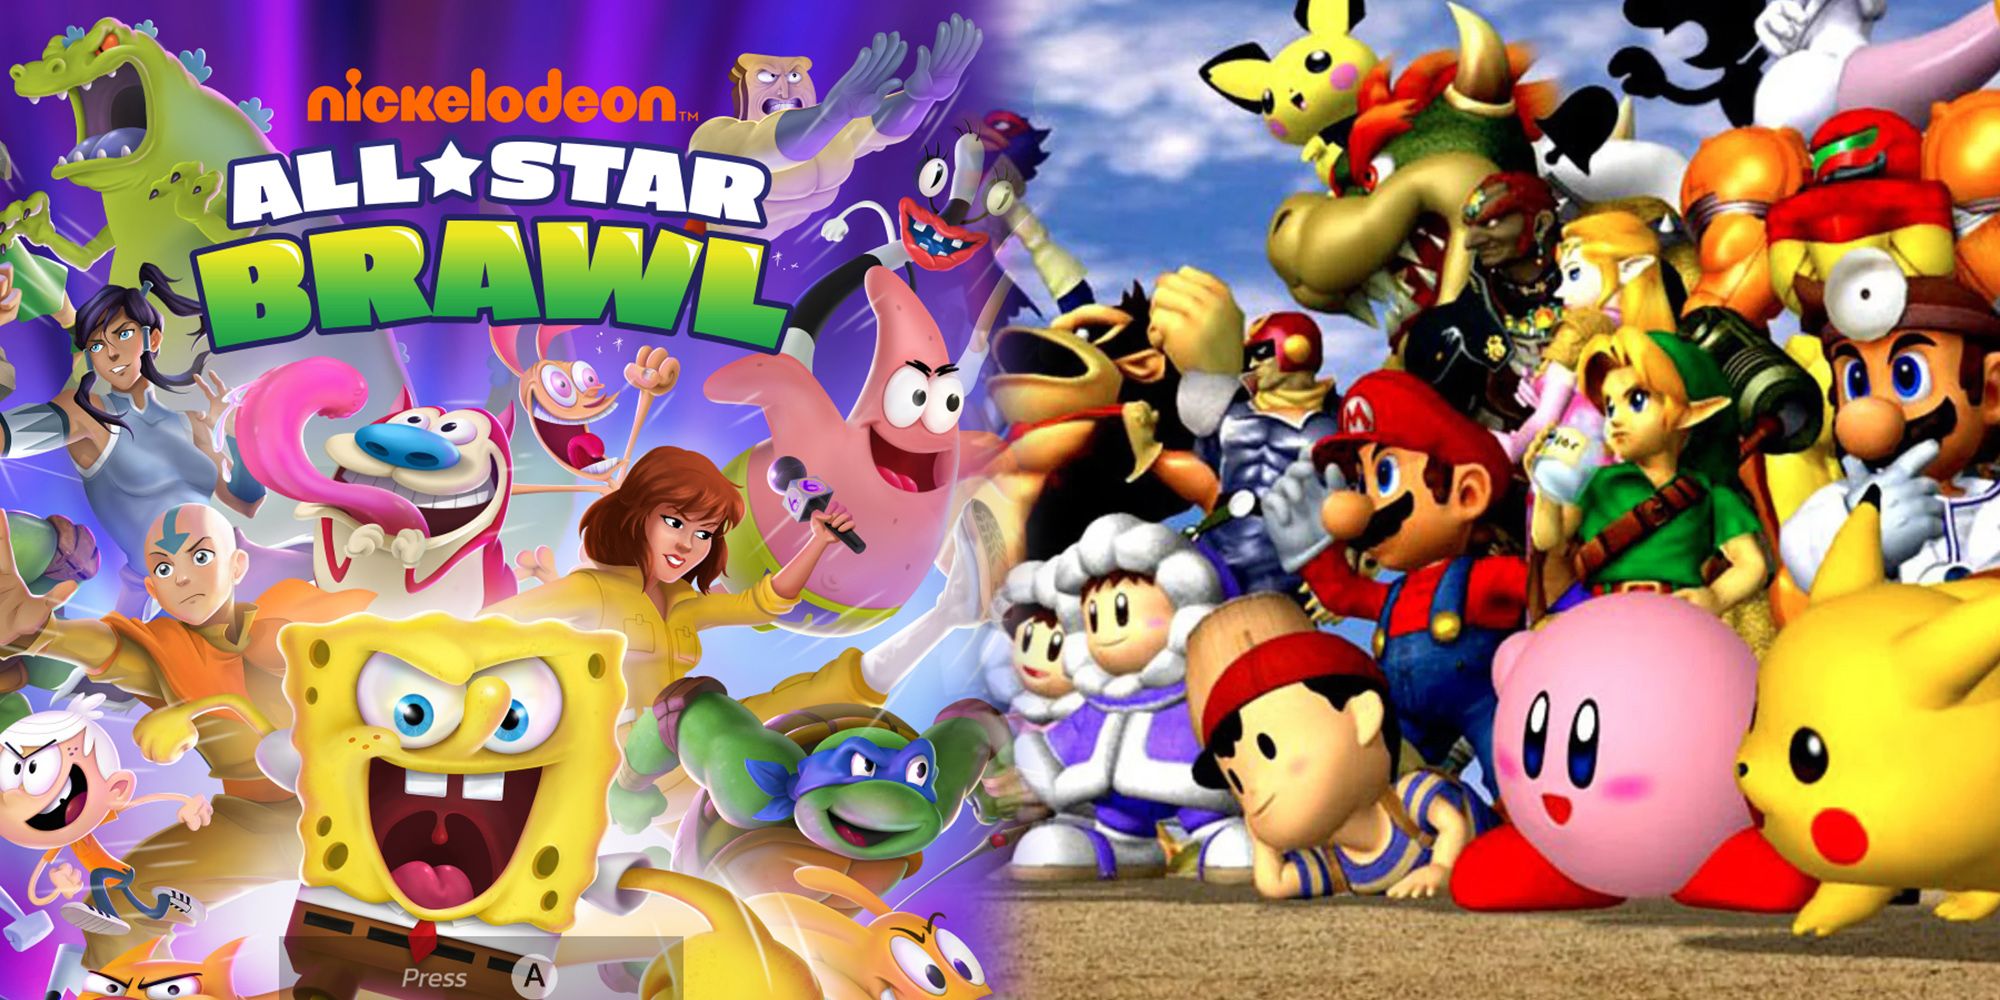 Nickelodeon All-Star Brawl - Title Screen For All-Star Brawl Compared To Group Shot From Super Smash Bros Melee